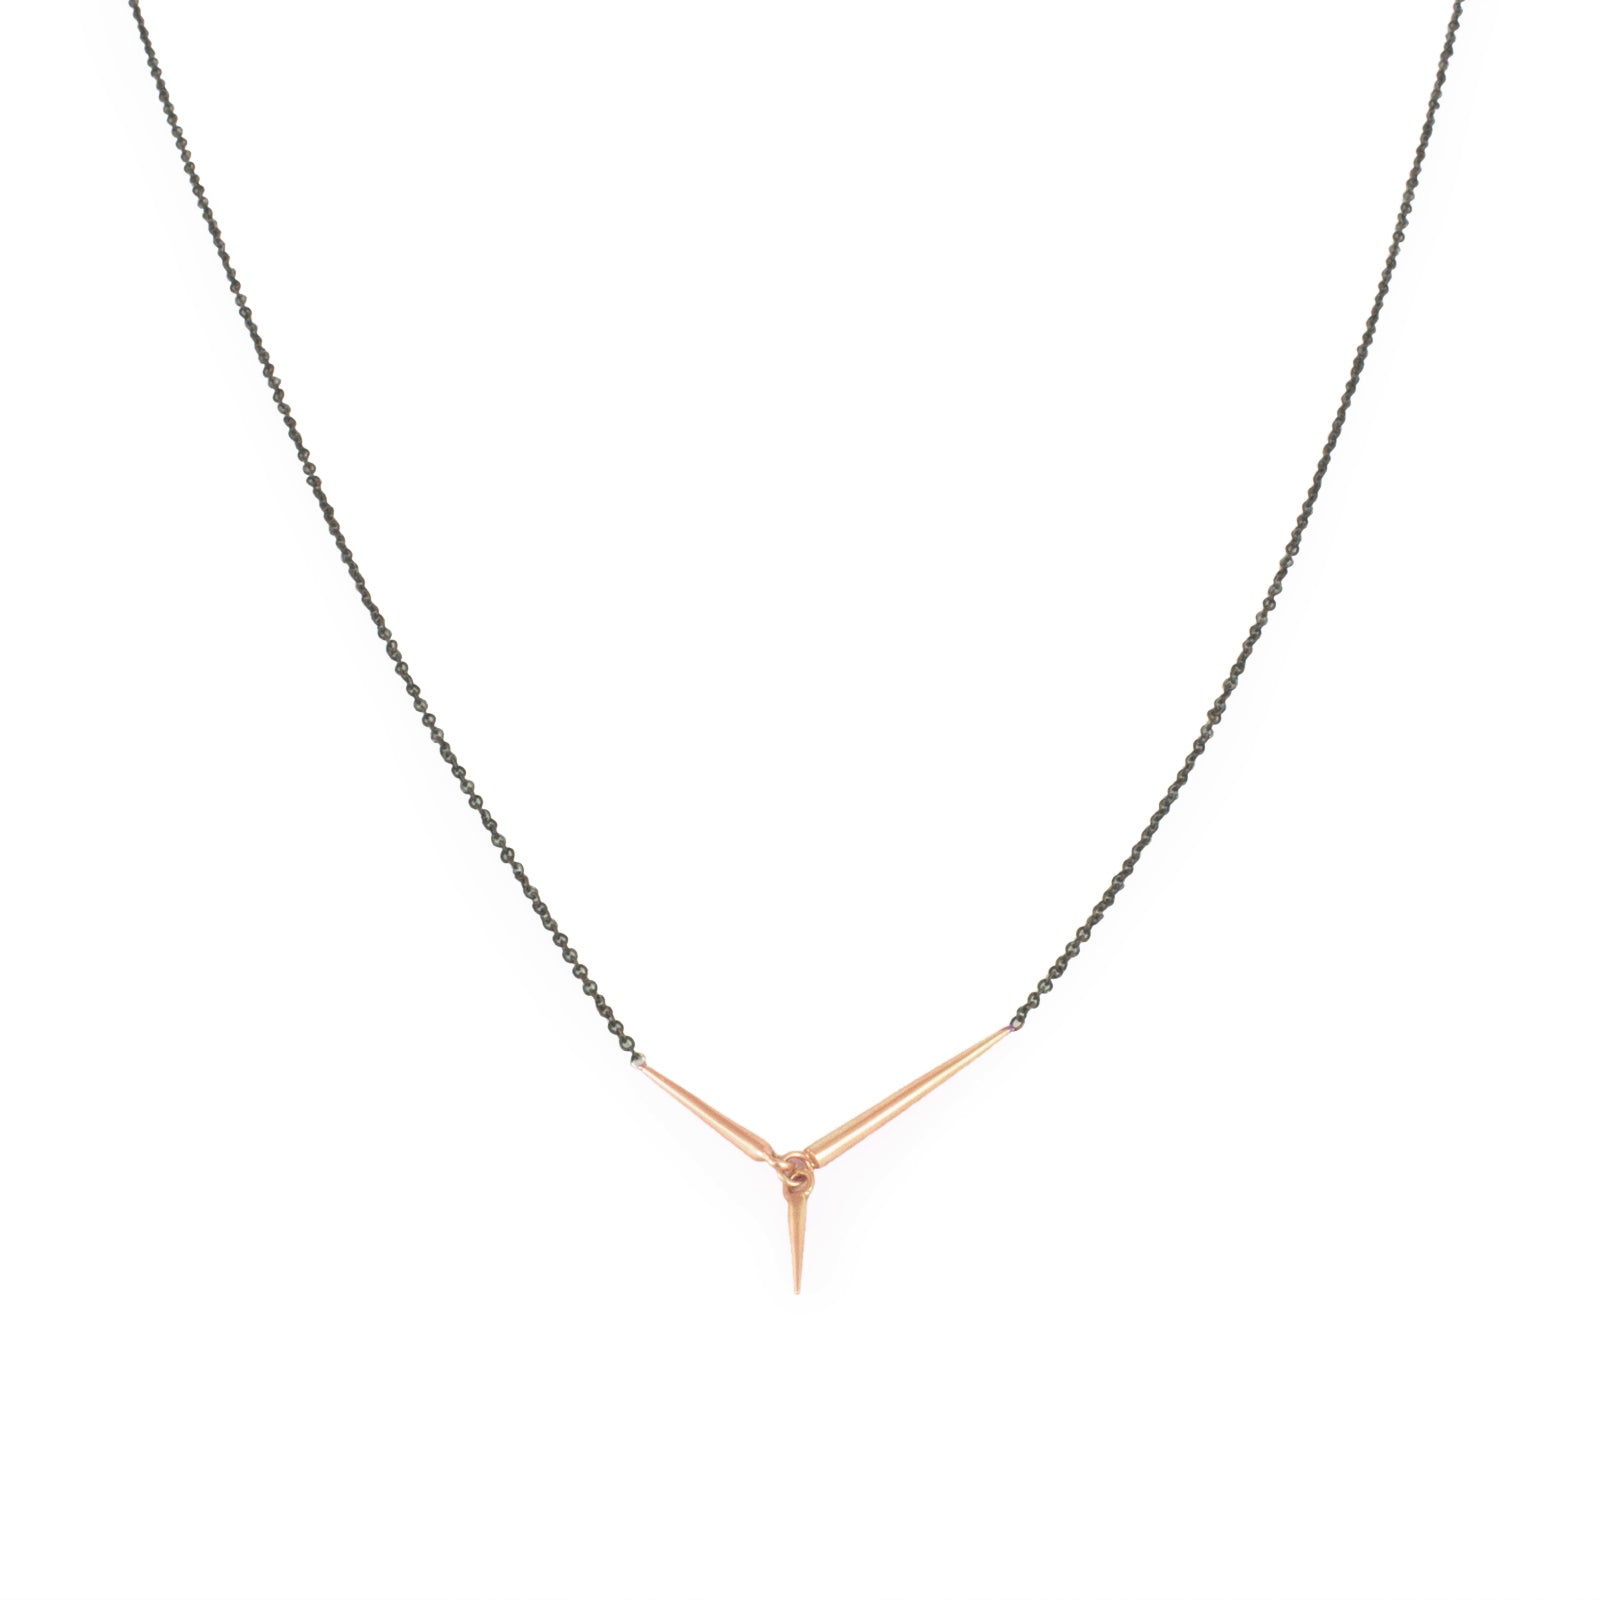 short / 18k rose gold/oxidized silver chain triad necklace